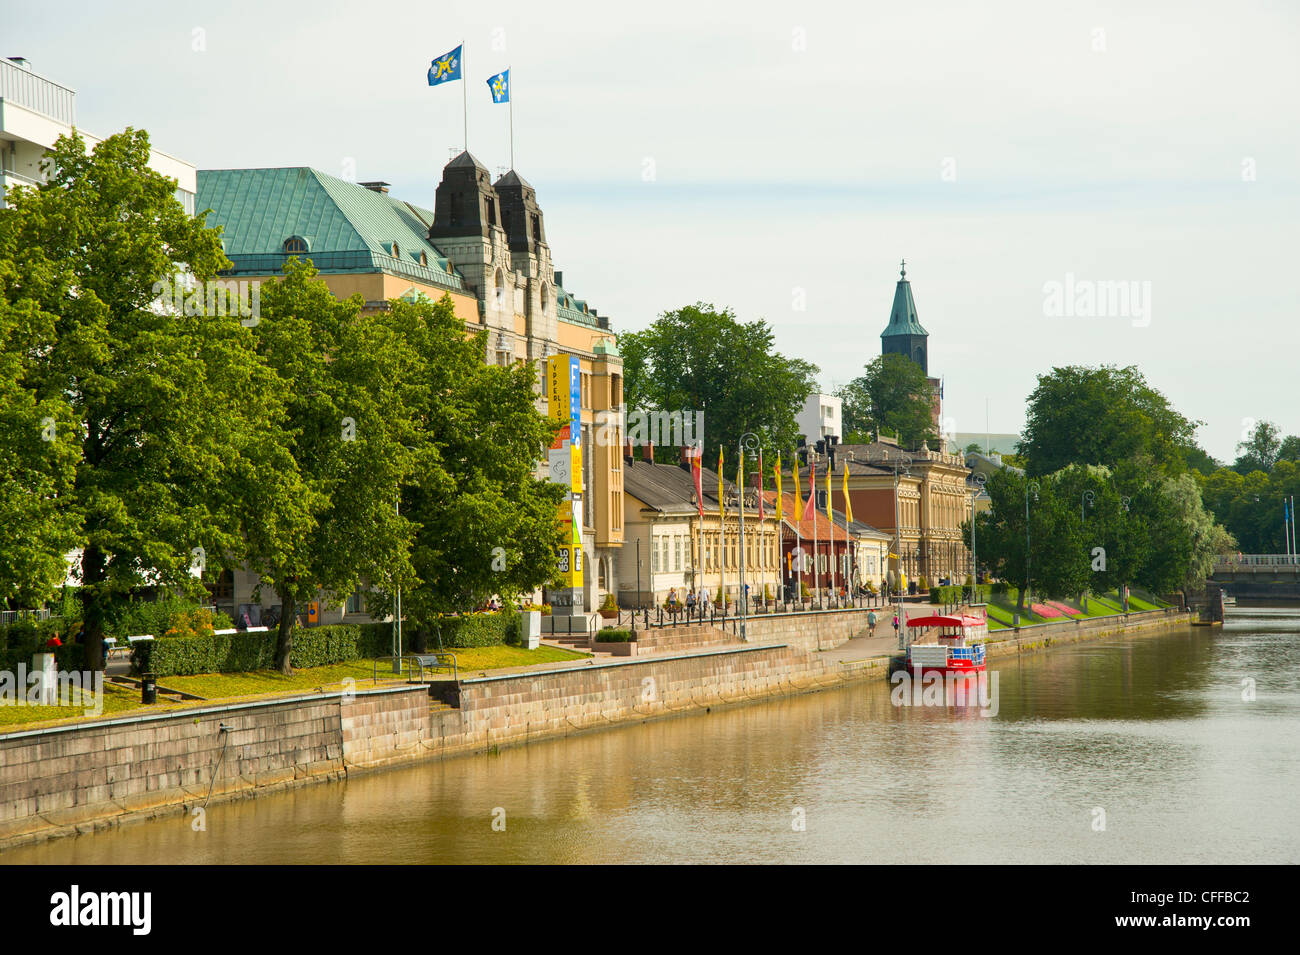 The river Aura (Aurajoki), Turku Finland with the Town Hall on left and Cathedral spire on the skyline Stock Photo